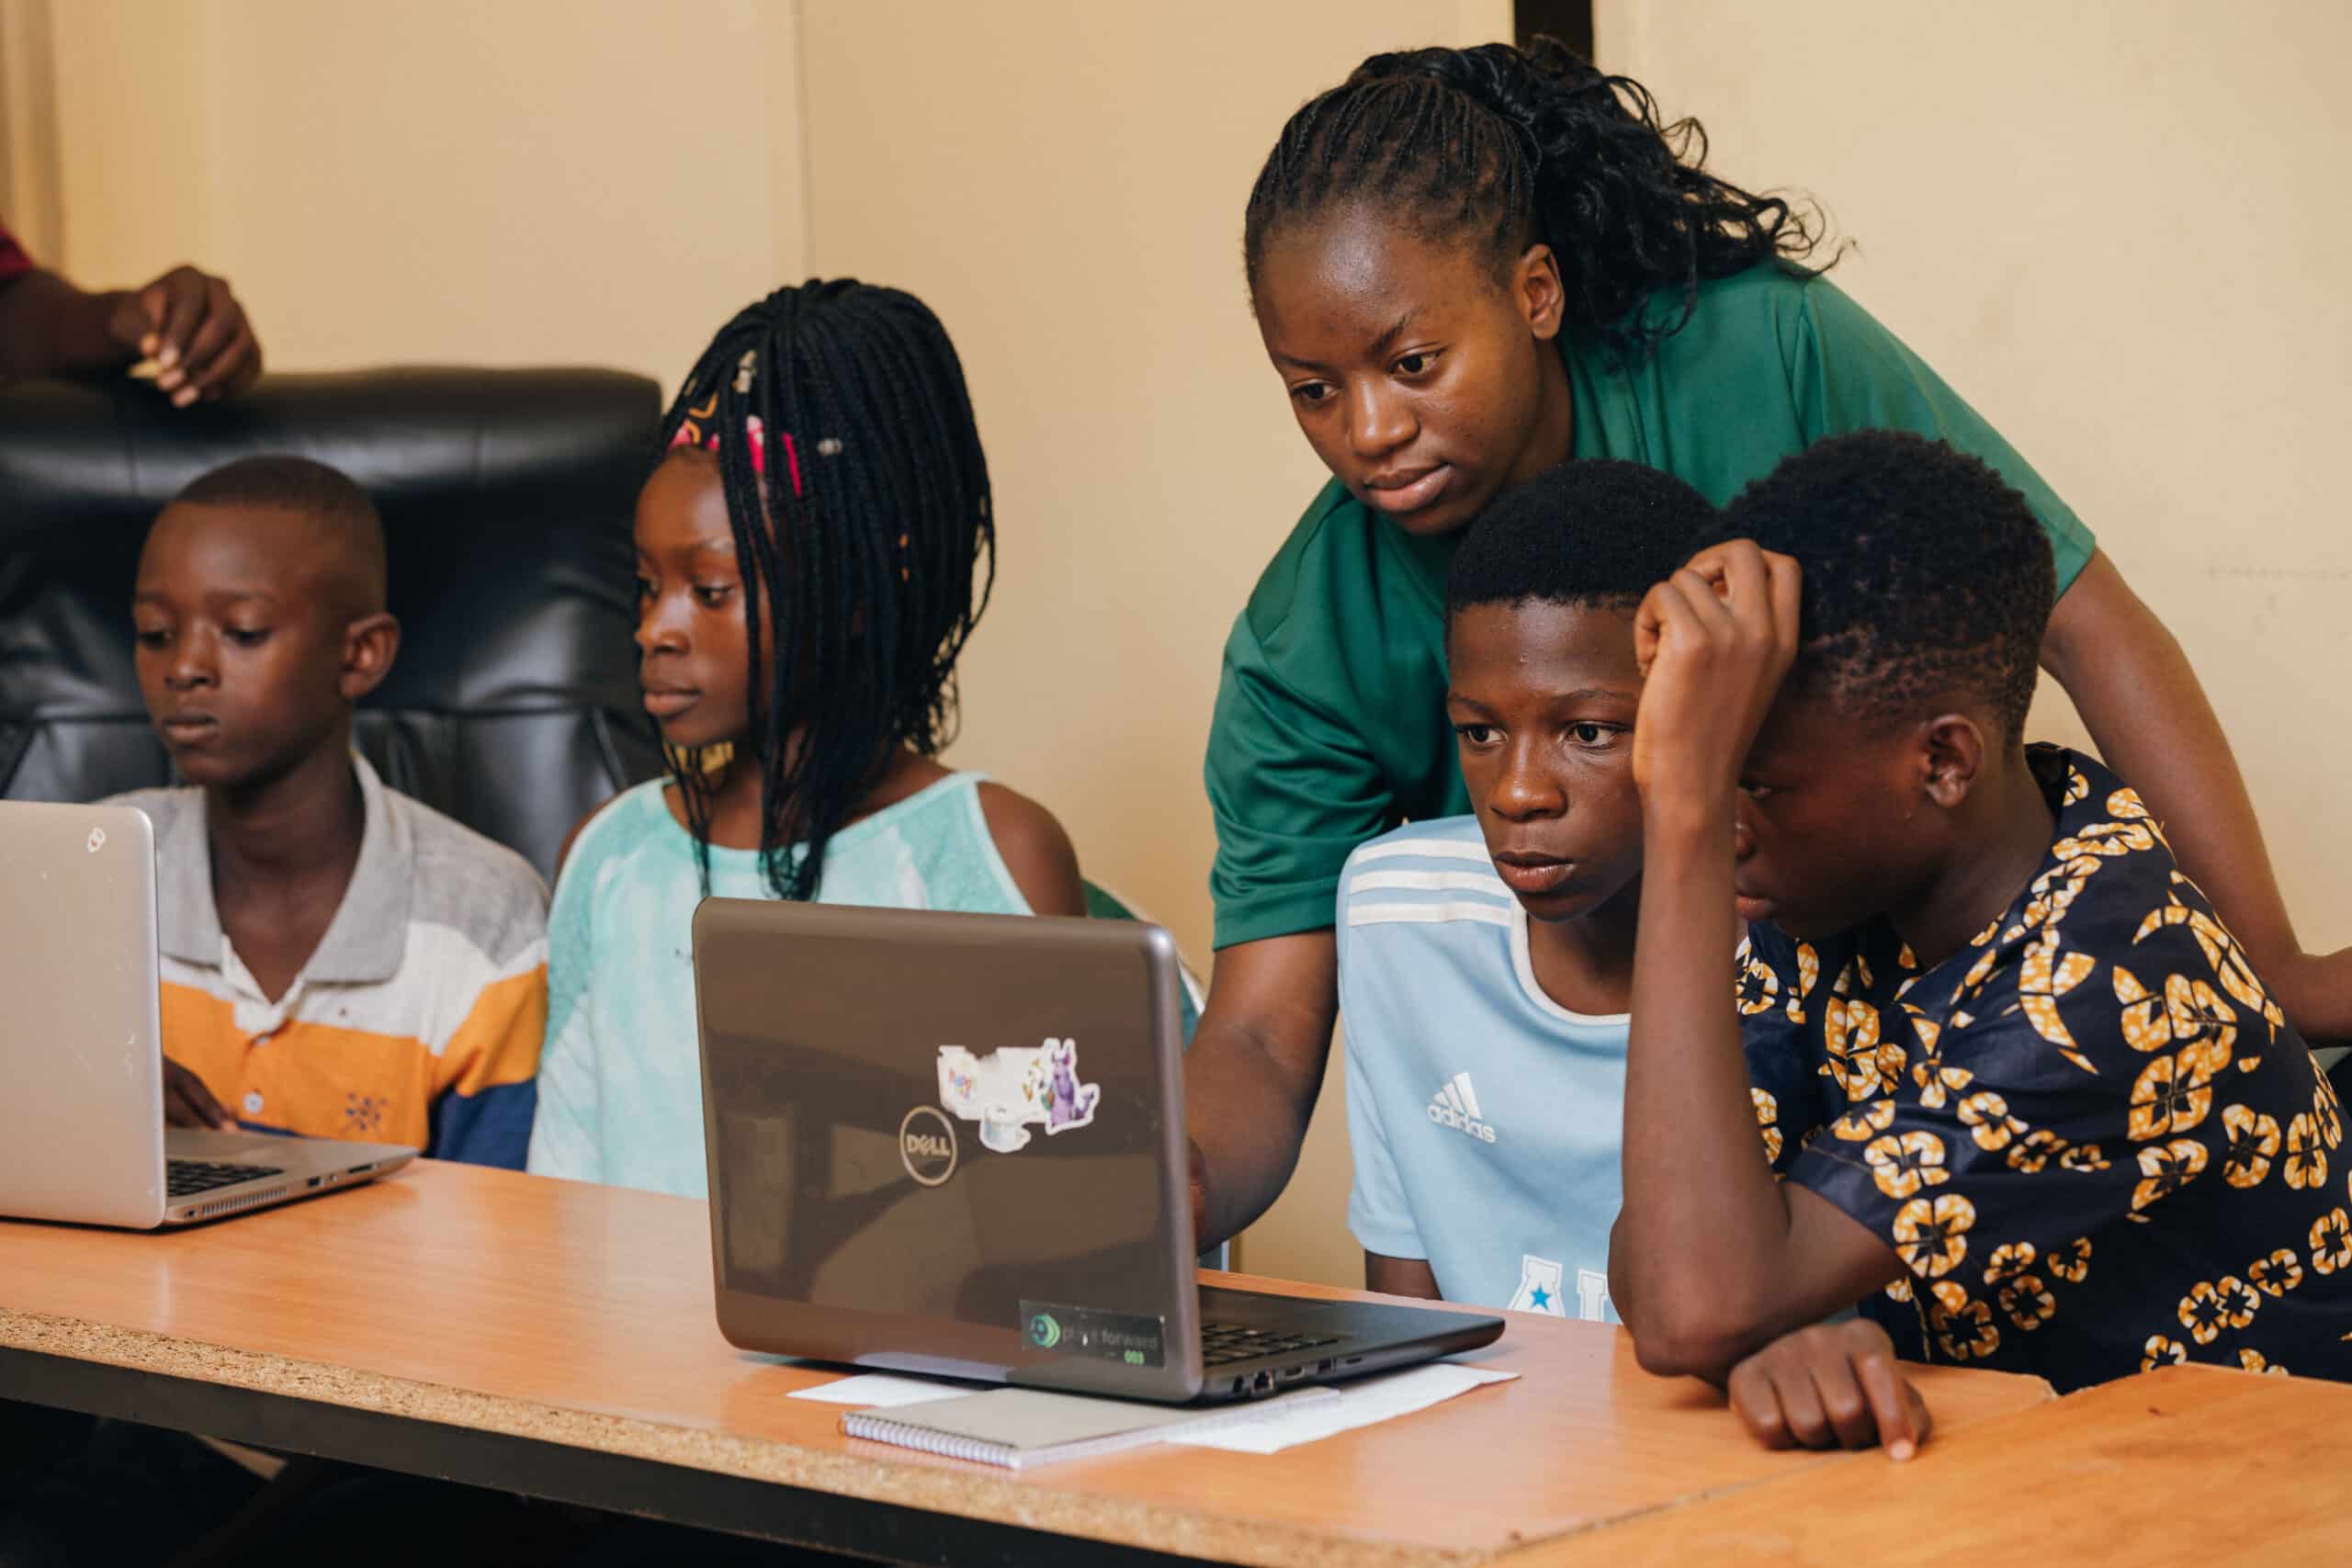 A project officer helping children in a digital skills learning session.